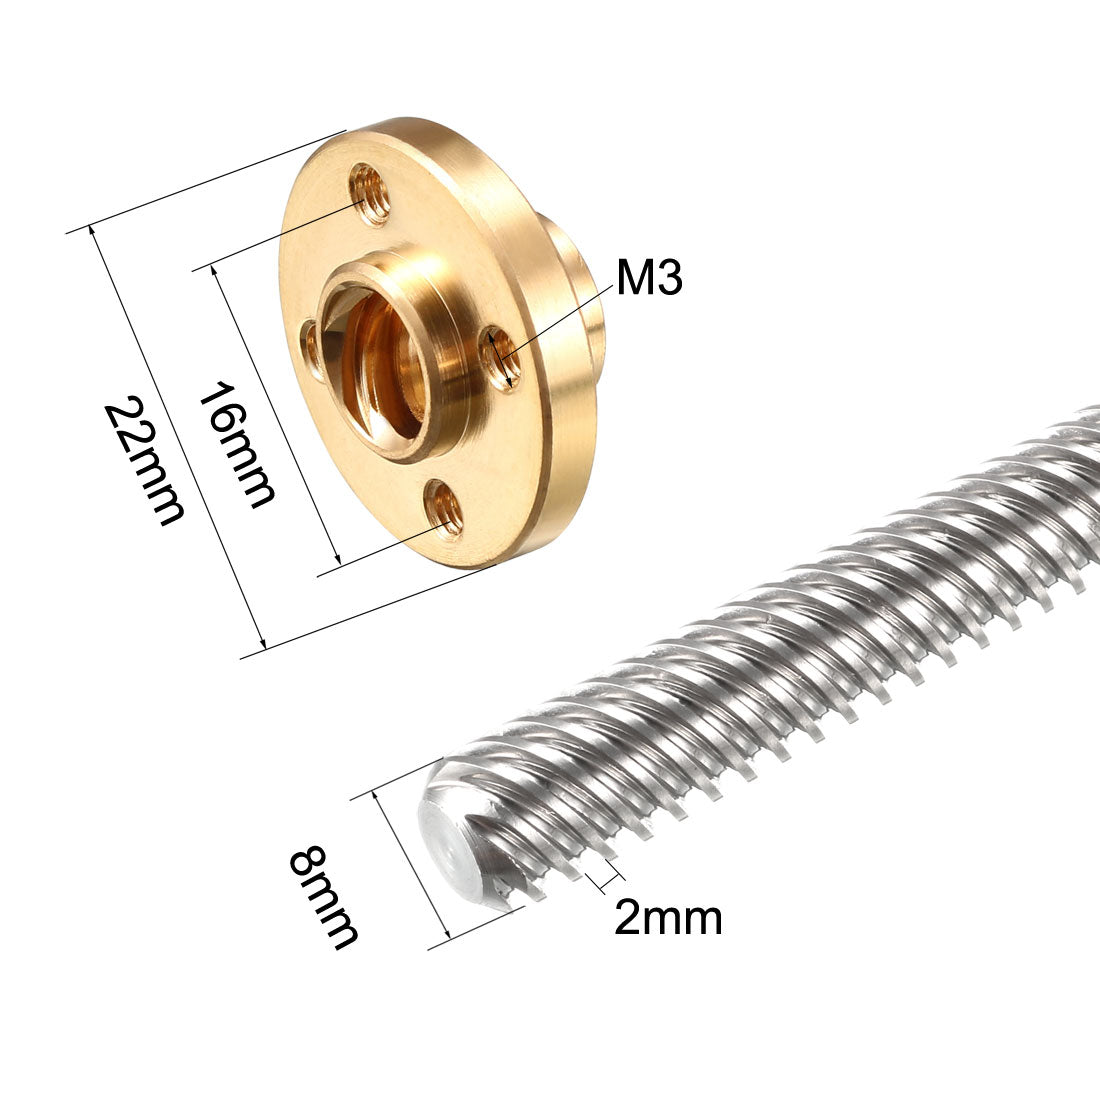 uxcell Uxcell 150mm T8 OD 8mm Stainless Steel Lead Screw Rod with Copper Nut (Acme Thread) for 3D Printer Z Axis